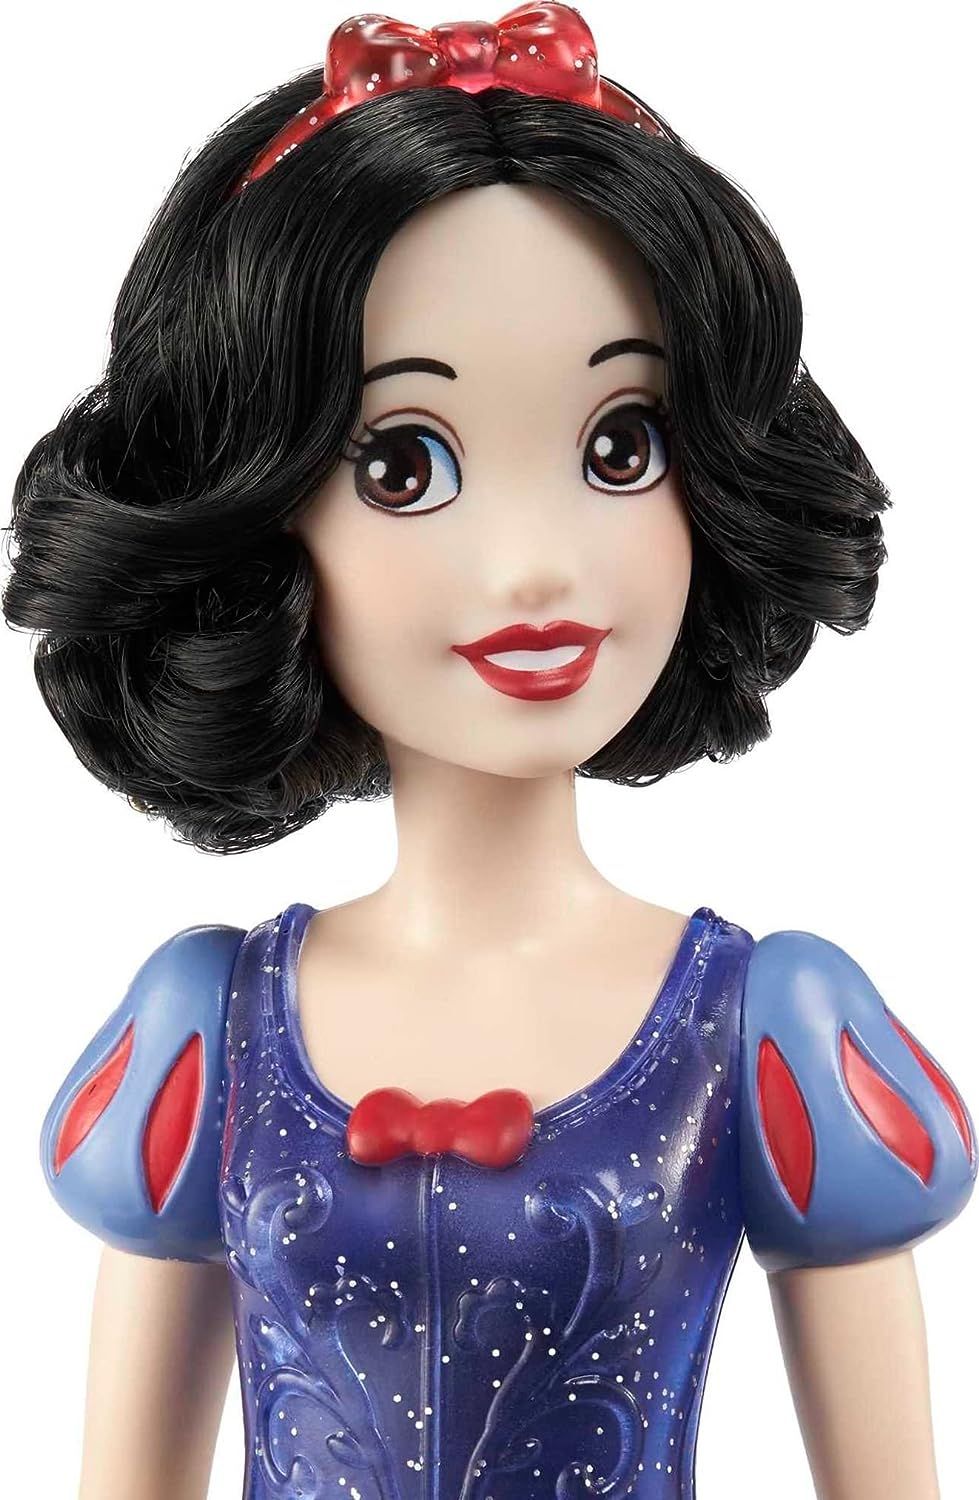 ?Disney Princess Toys, Snow White Posable Fashion Doll with Sparkling Clothing and Accessories